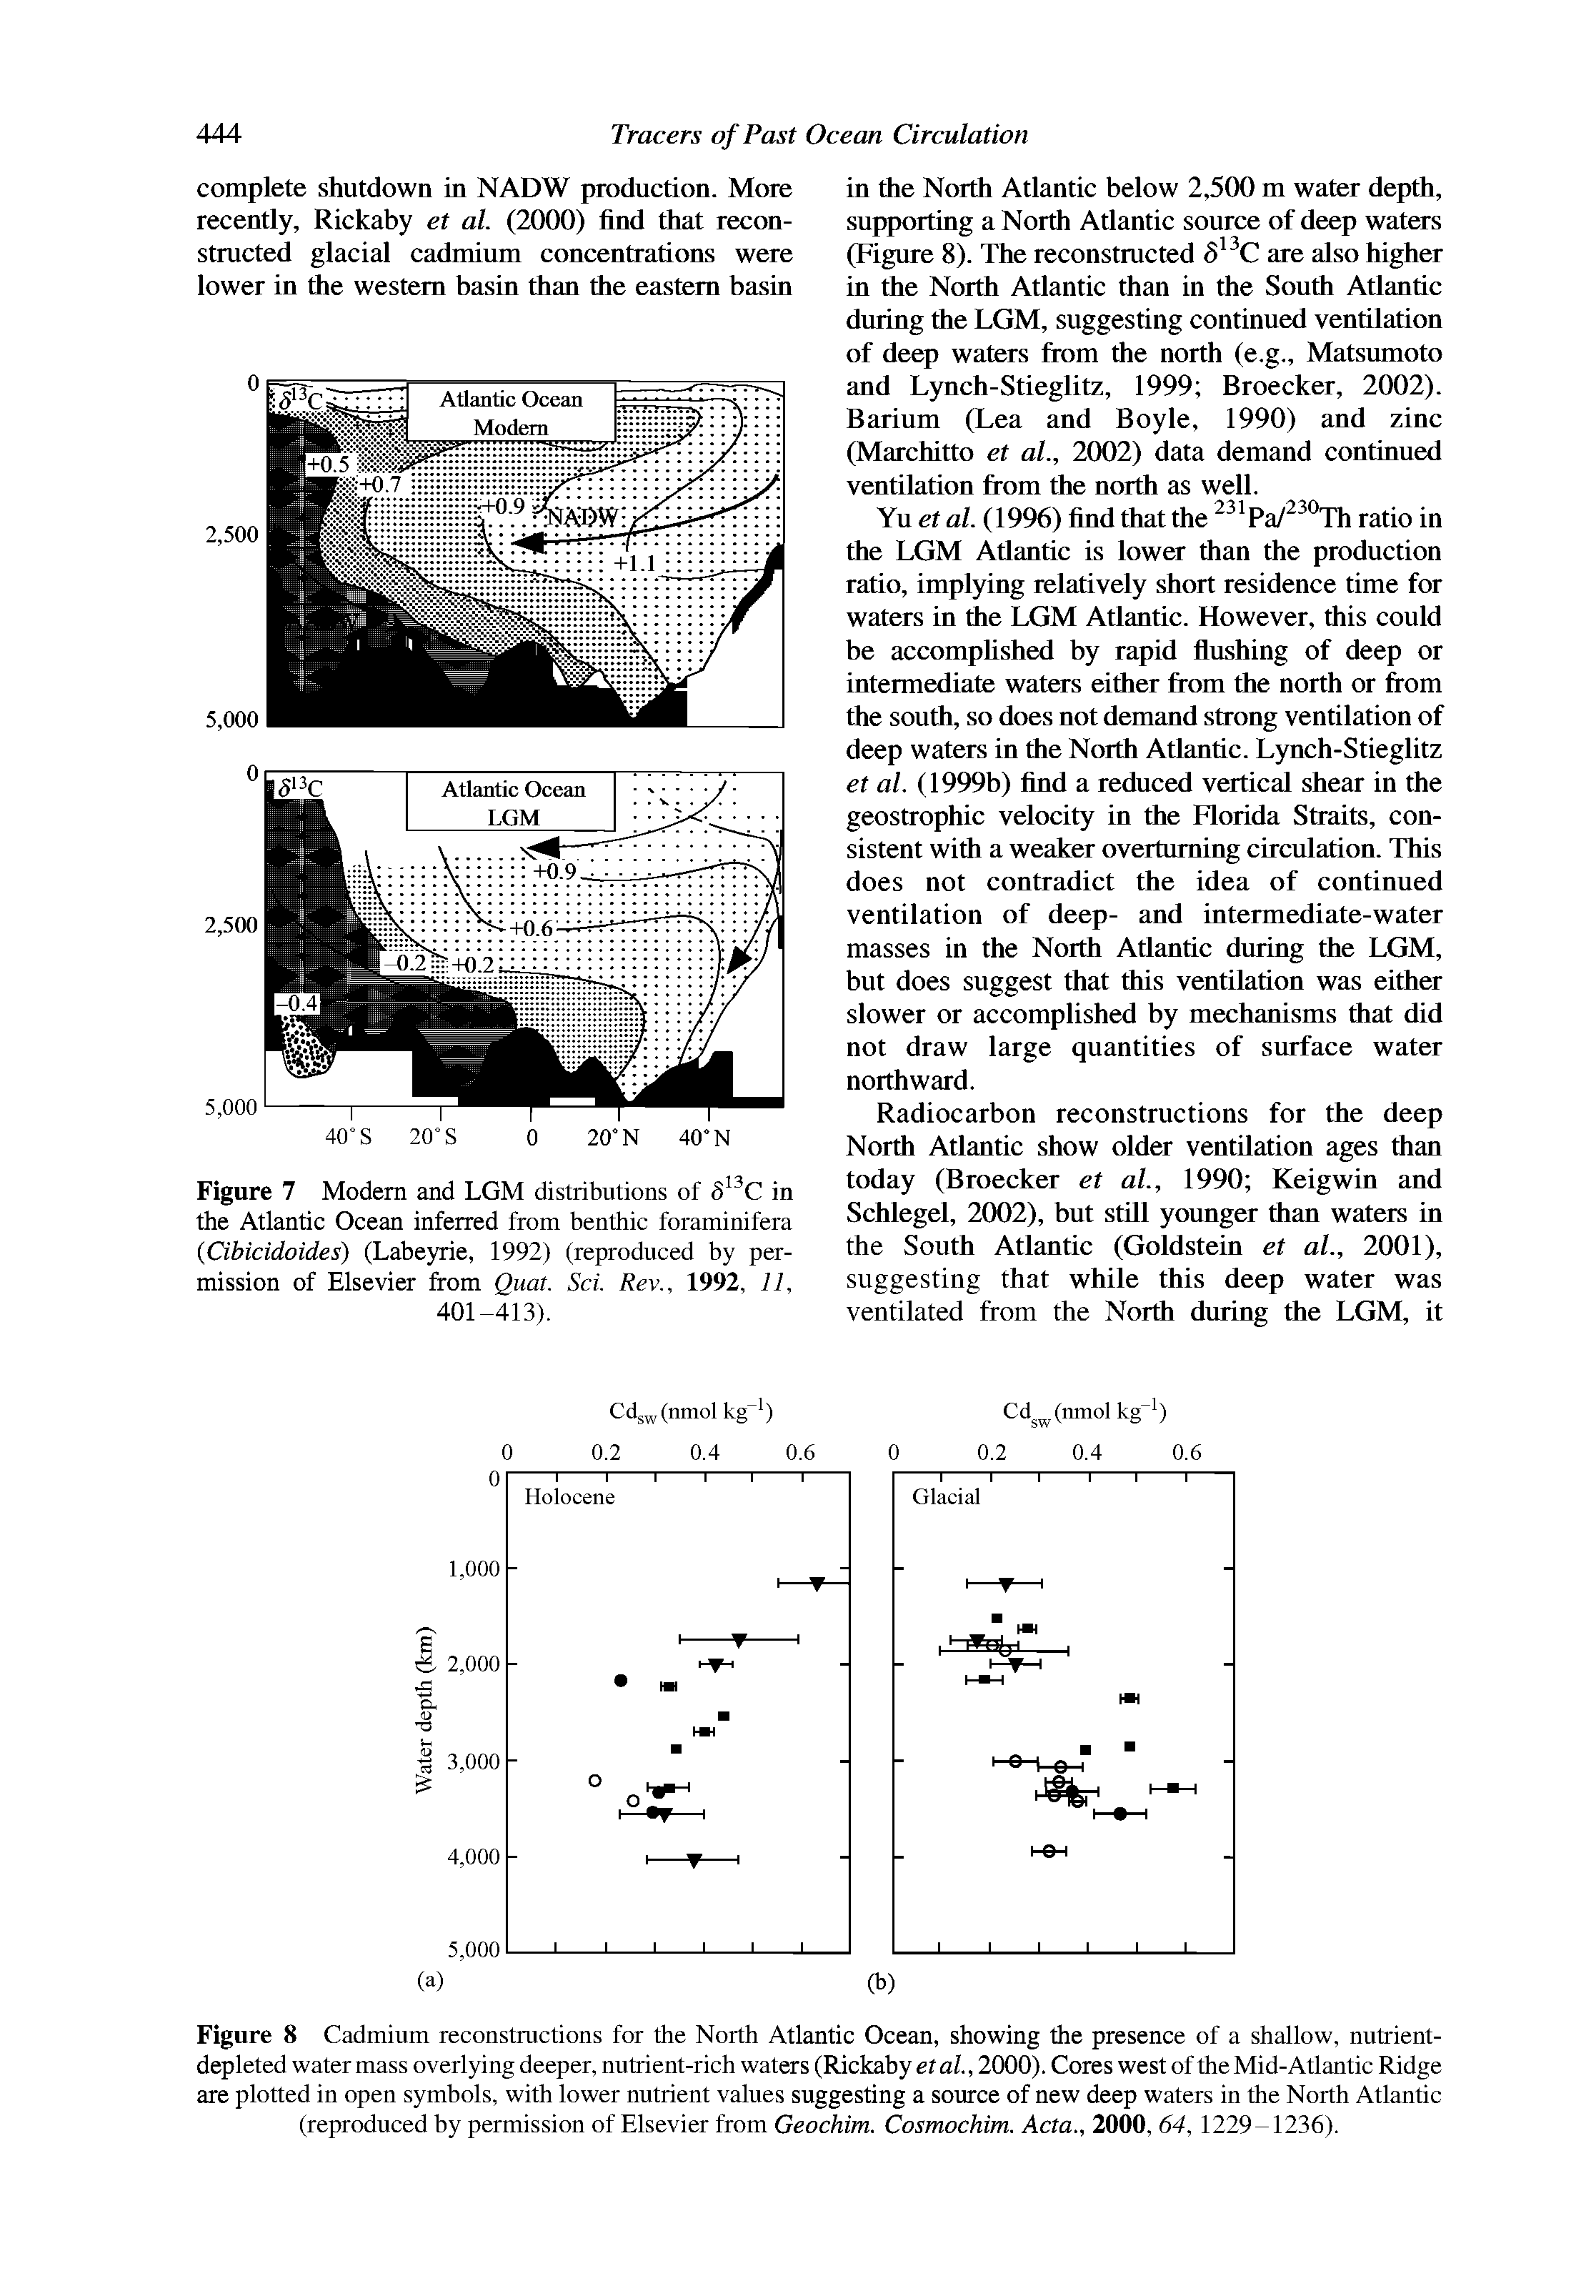 Figure 7 Modern and LGM distributions of in the Atlantic Ocean inferred from benthic foraminifera (Cibicidoides) (Laheyrie, 1992) (reproduced by permission of Elsevier from Quat. Sci. Rev., 1992, 11, 401-413).